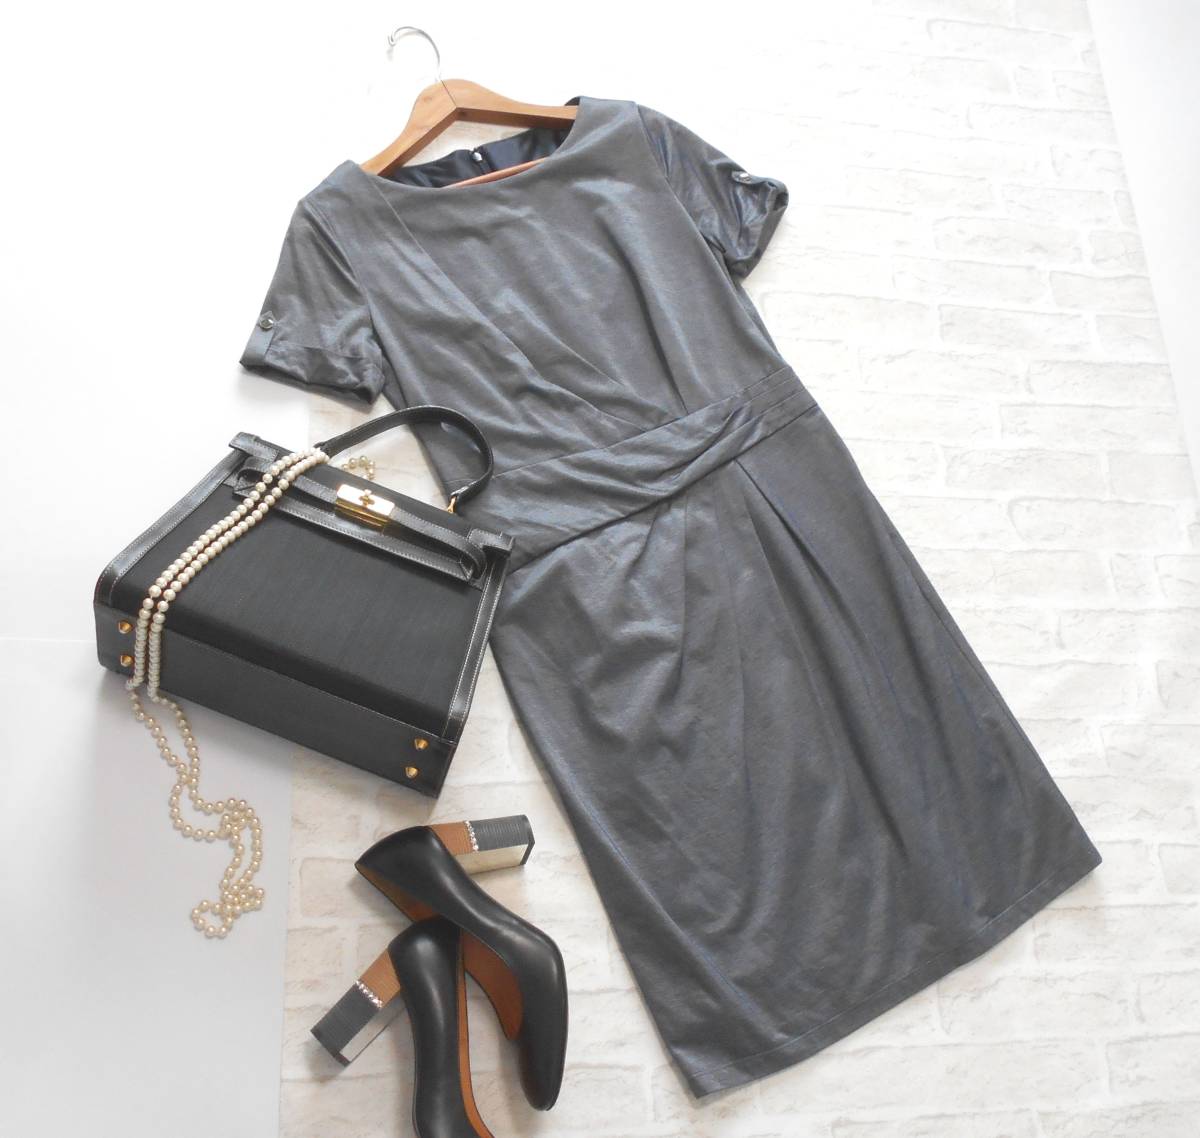 ( beautiful goods postage included!) COUP DE CHANCE Coup de Chance gray ... cotton jersey - One-piece ( made in Japan stretch dress ...)